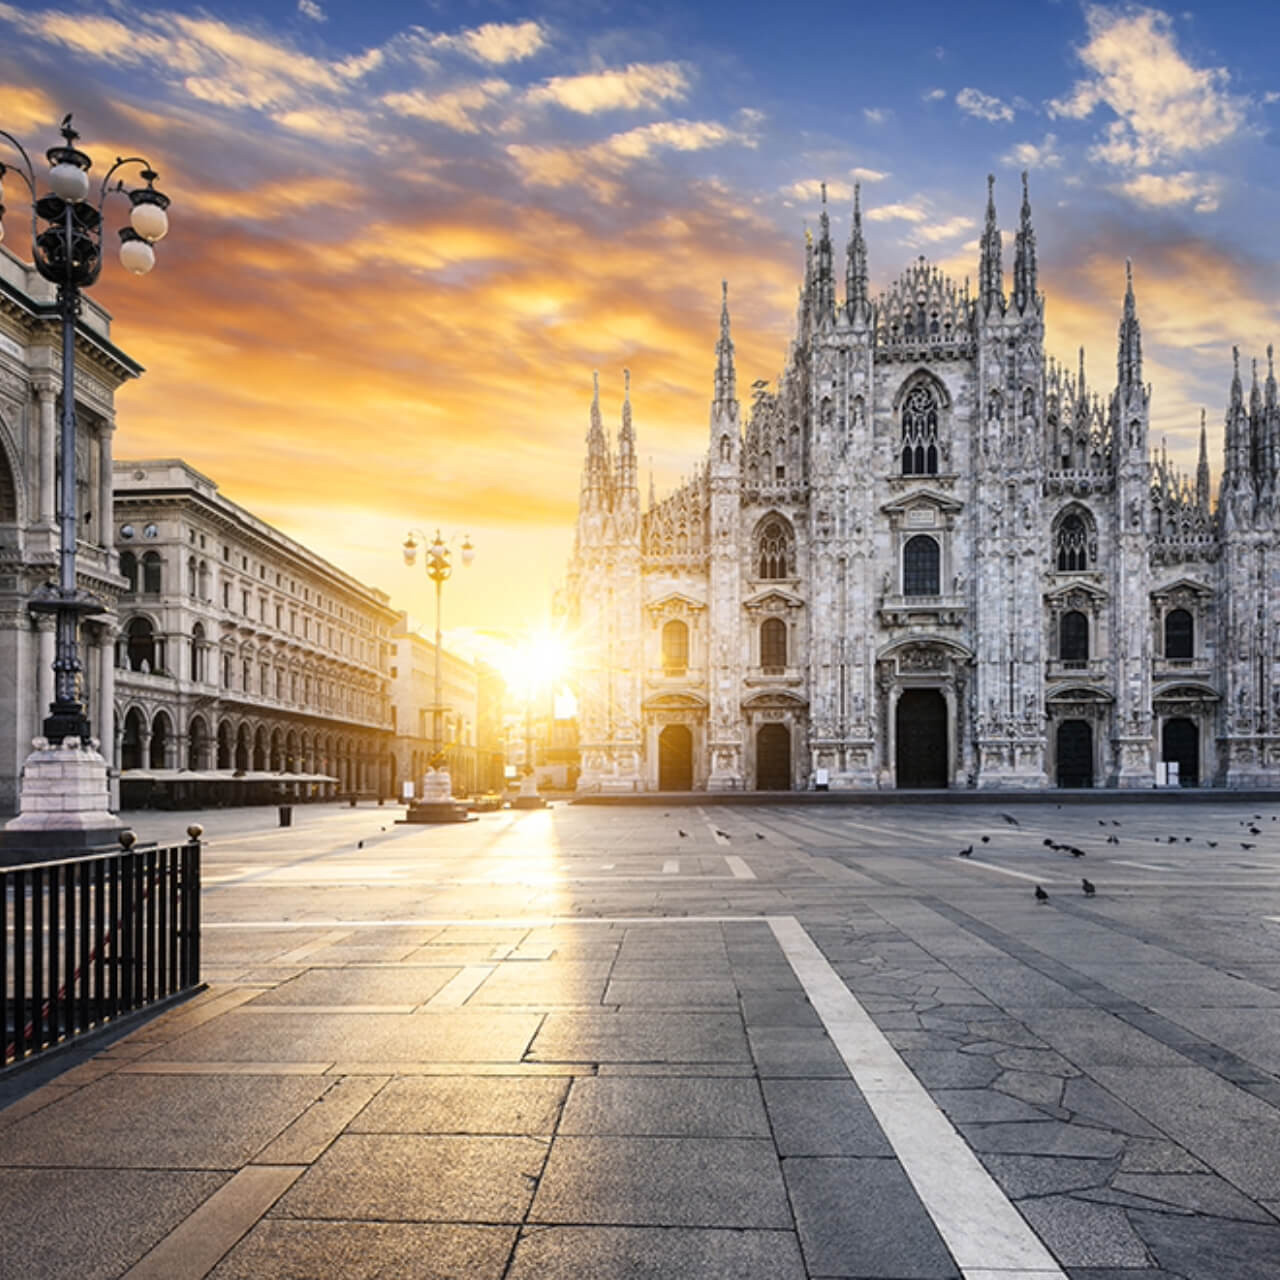 Sunrise over the Piazza del Duomo in Milan, with the sun casting a warm glow on the Gothic facade of the Duomo di Milano and the surrounding buildings, the square quiet and empty.